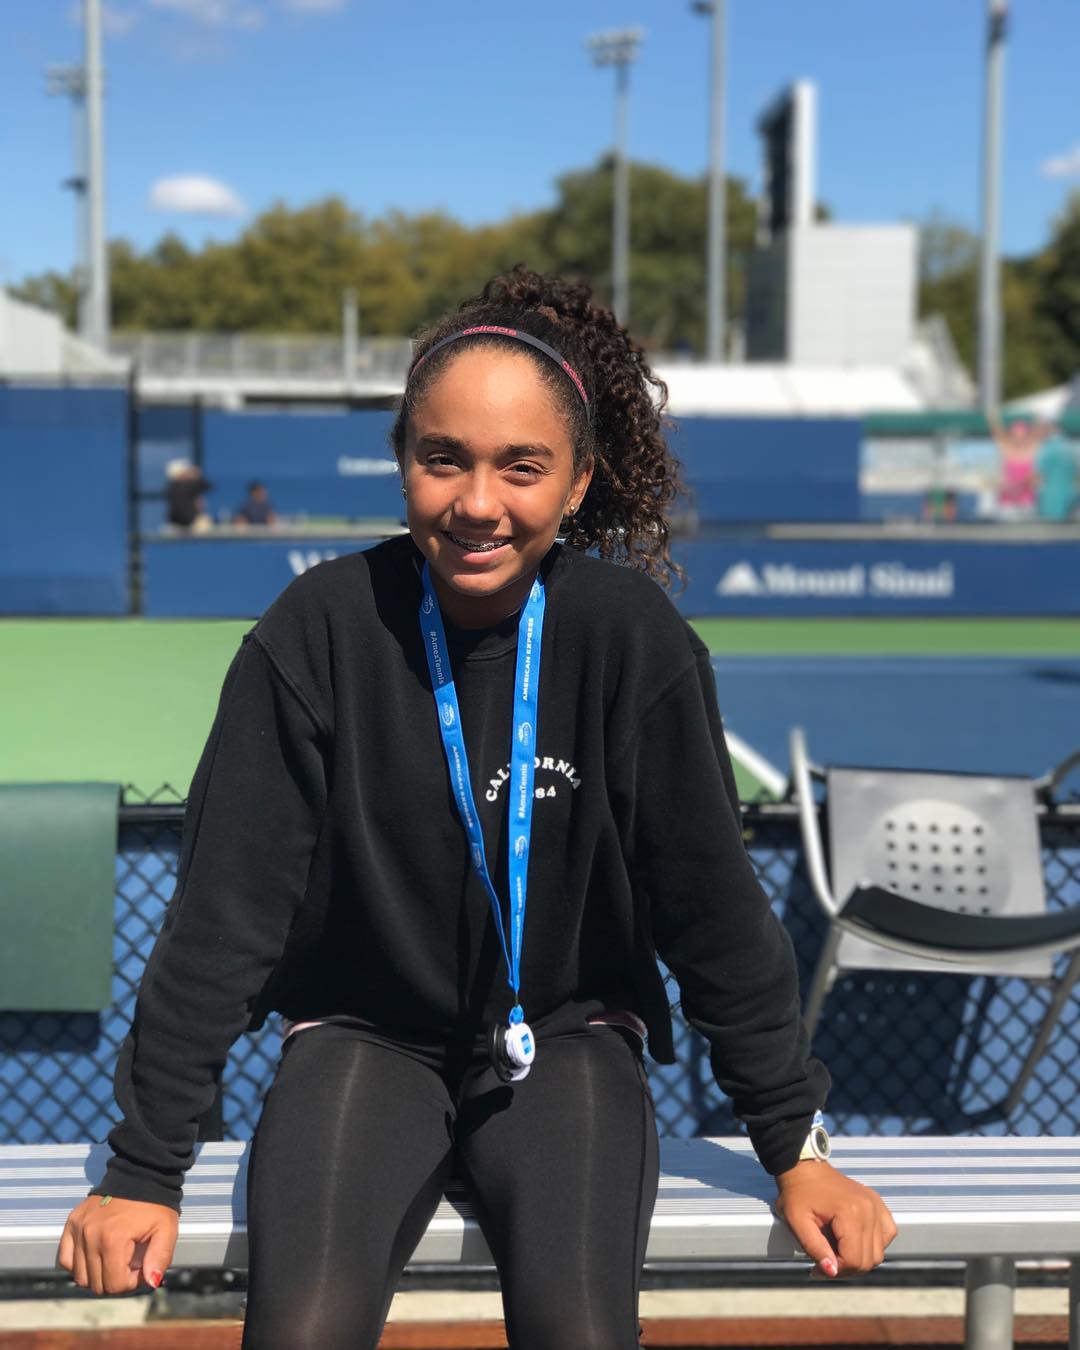 Katrina Scott in 2017 During The US Open